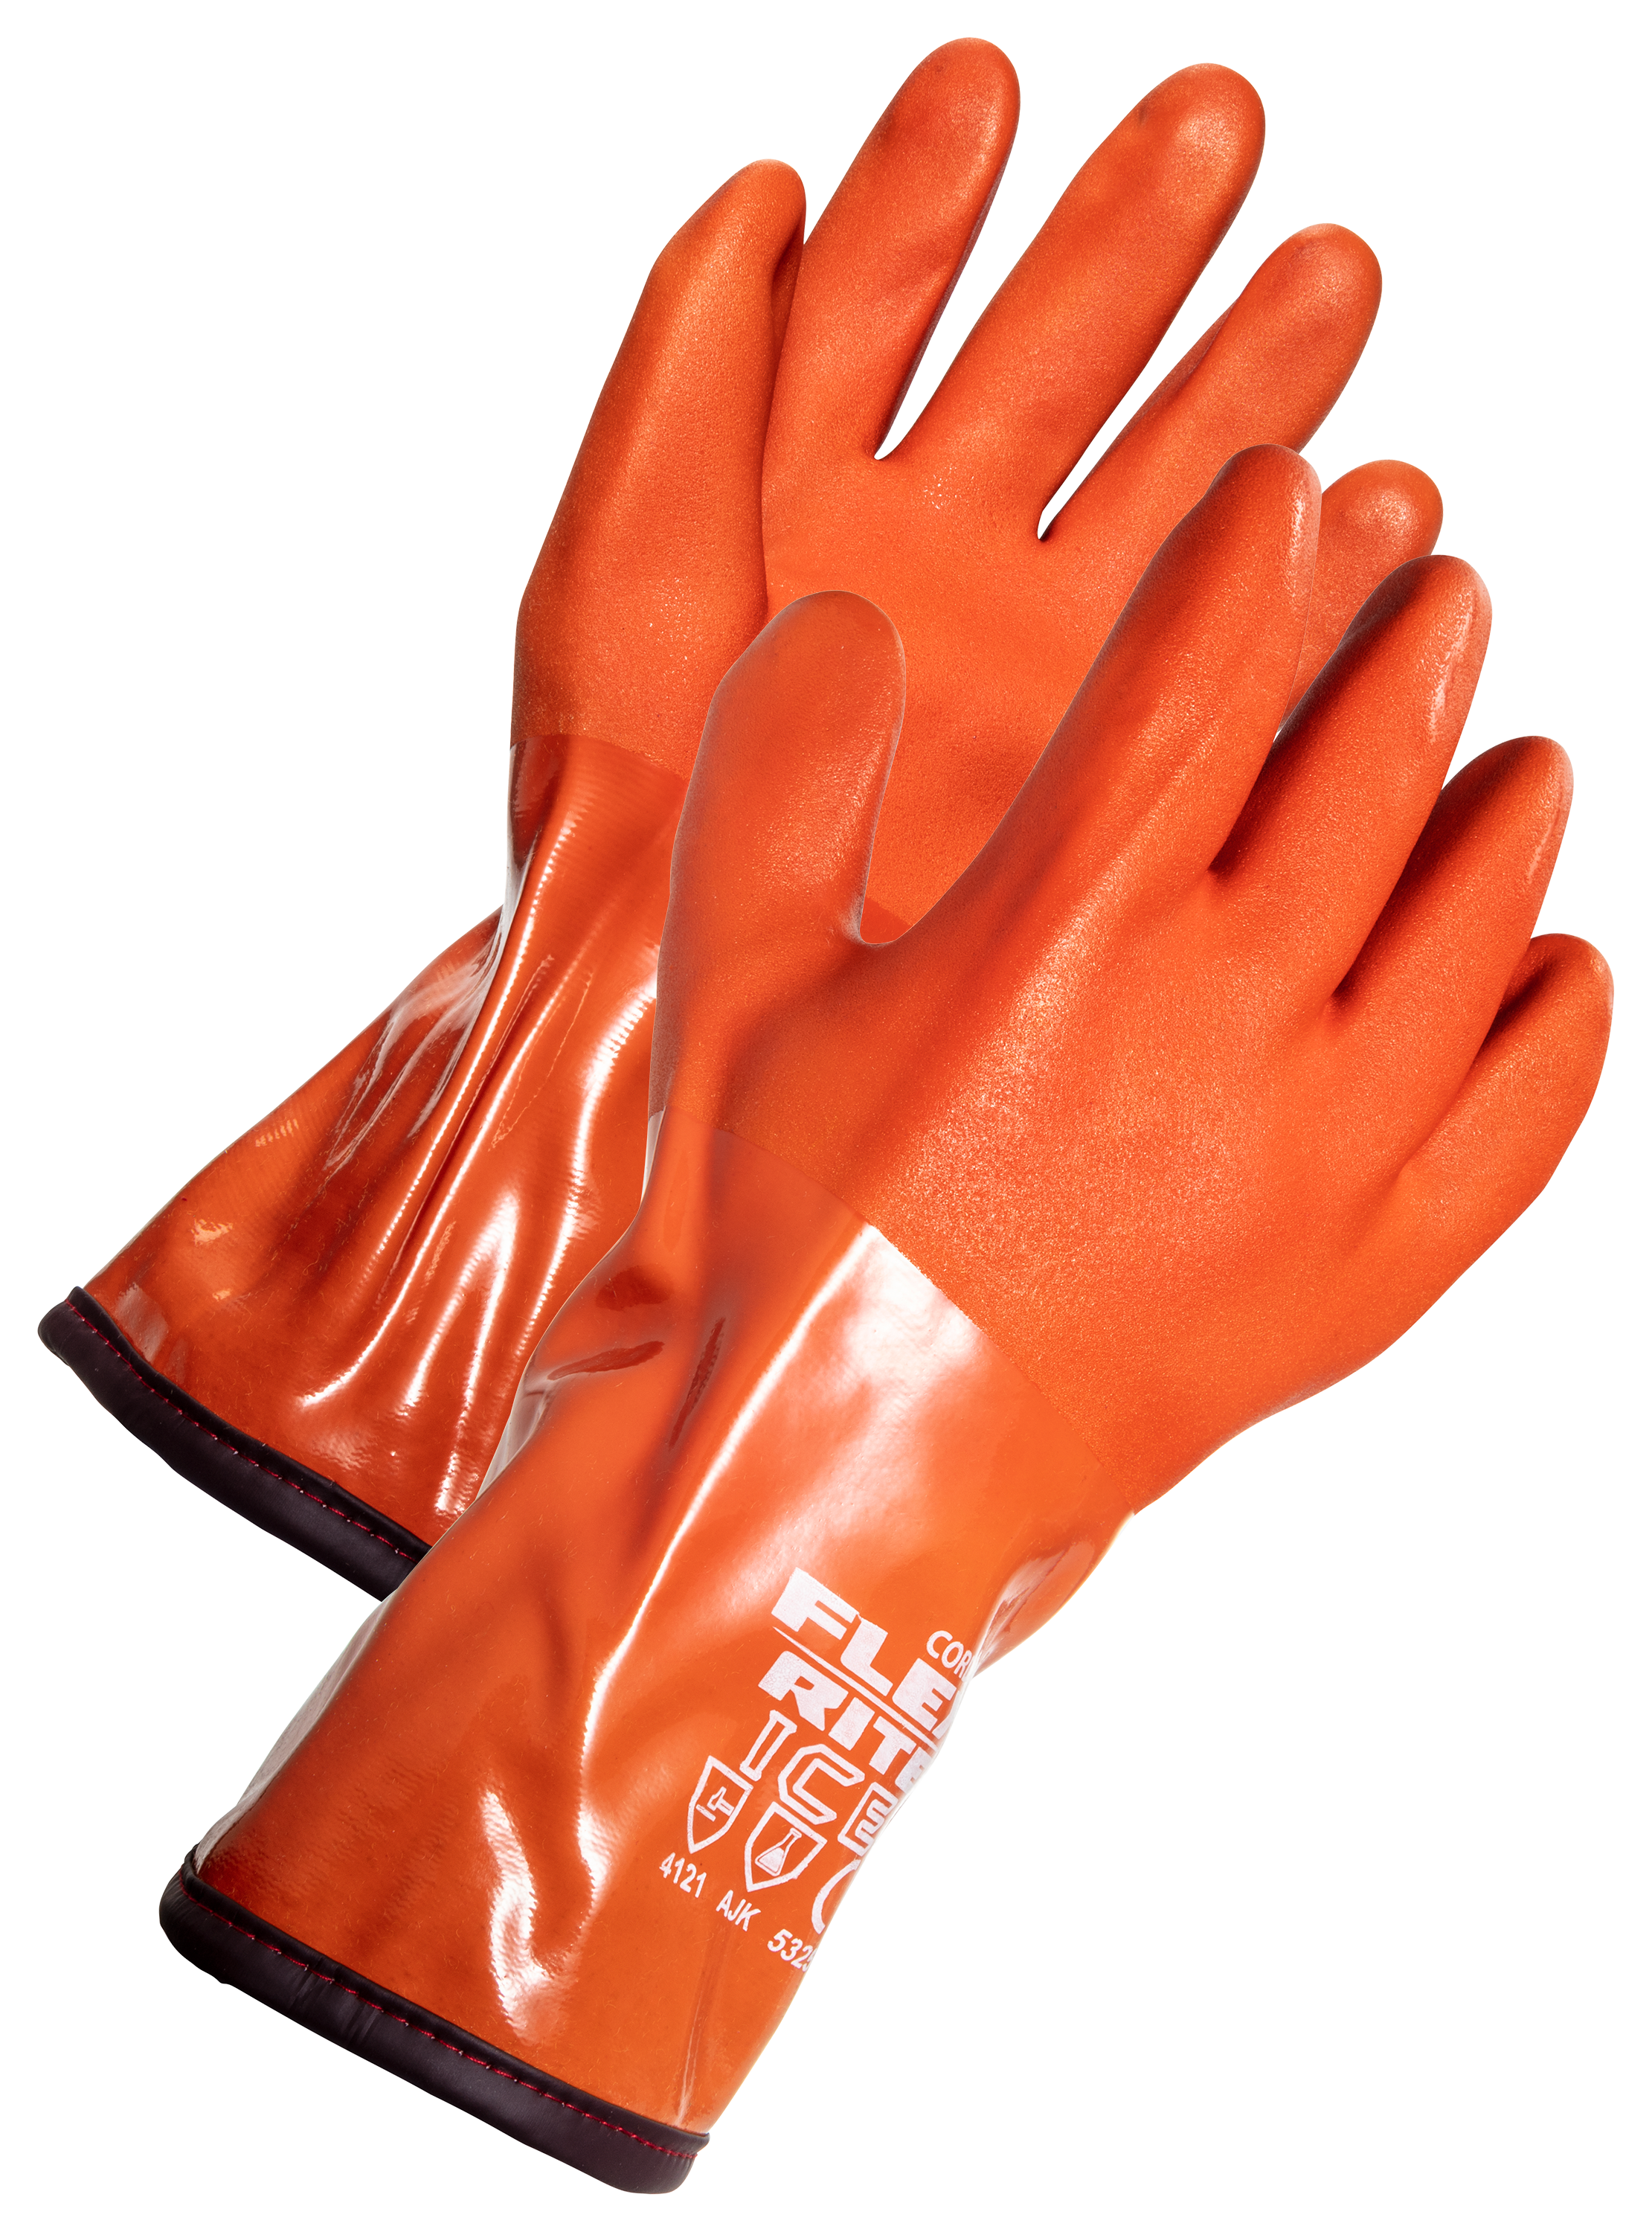 Fish Handling/Cleaning Gloves Textured Grip Palm Soft Lining Fillet Gloves One Size Fits Most L To XL